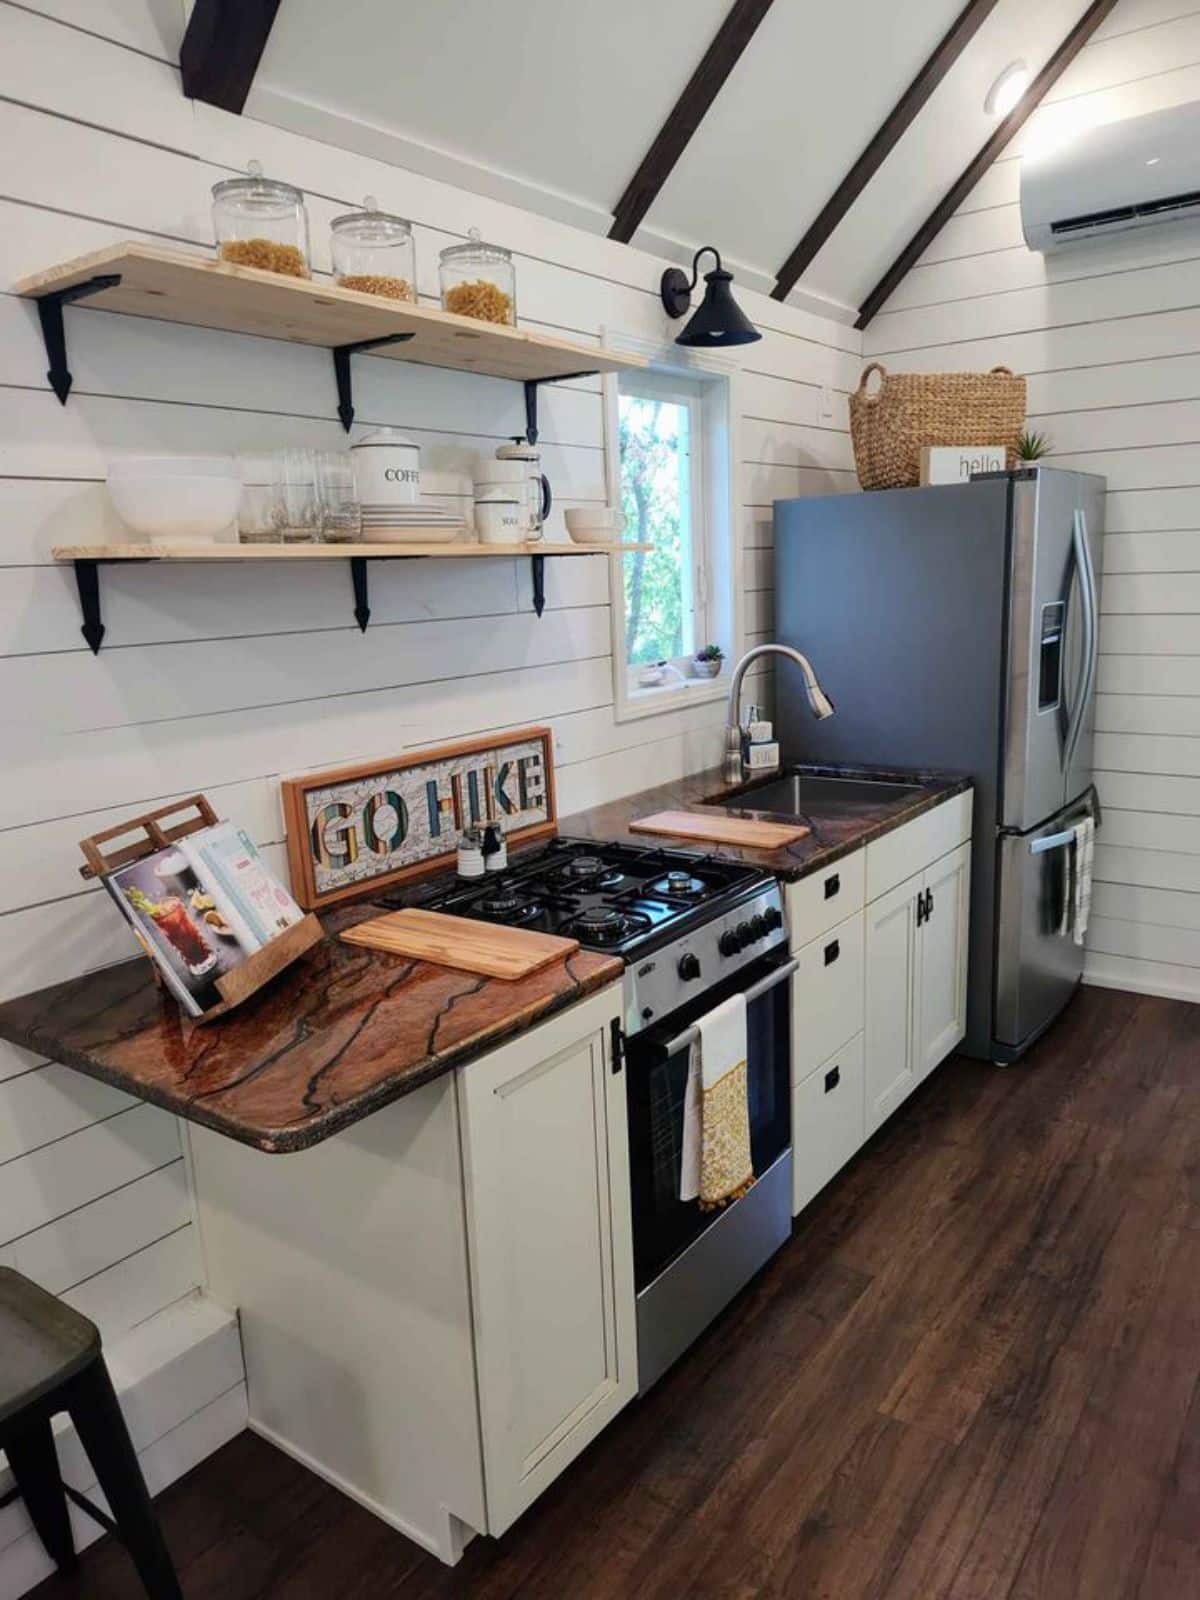 Well organized kitchen area of 38’ Tiny House has a burner and refregerator